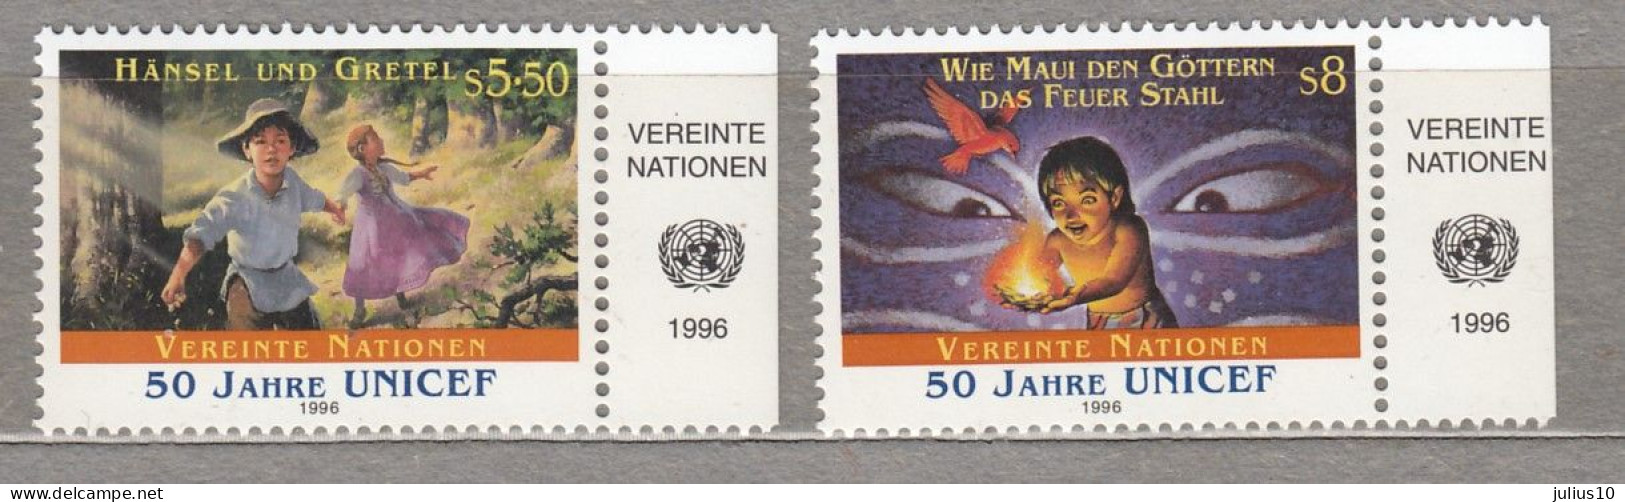 United Nations 1996 Tales MNH (**) Mi 218-219 #34103 - Contes, Fables & Légendes